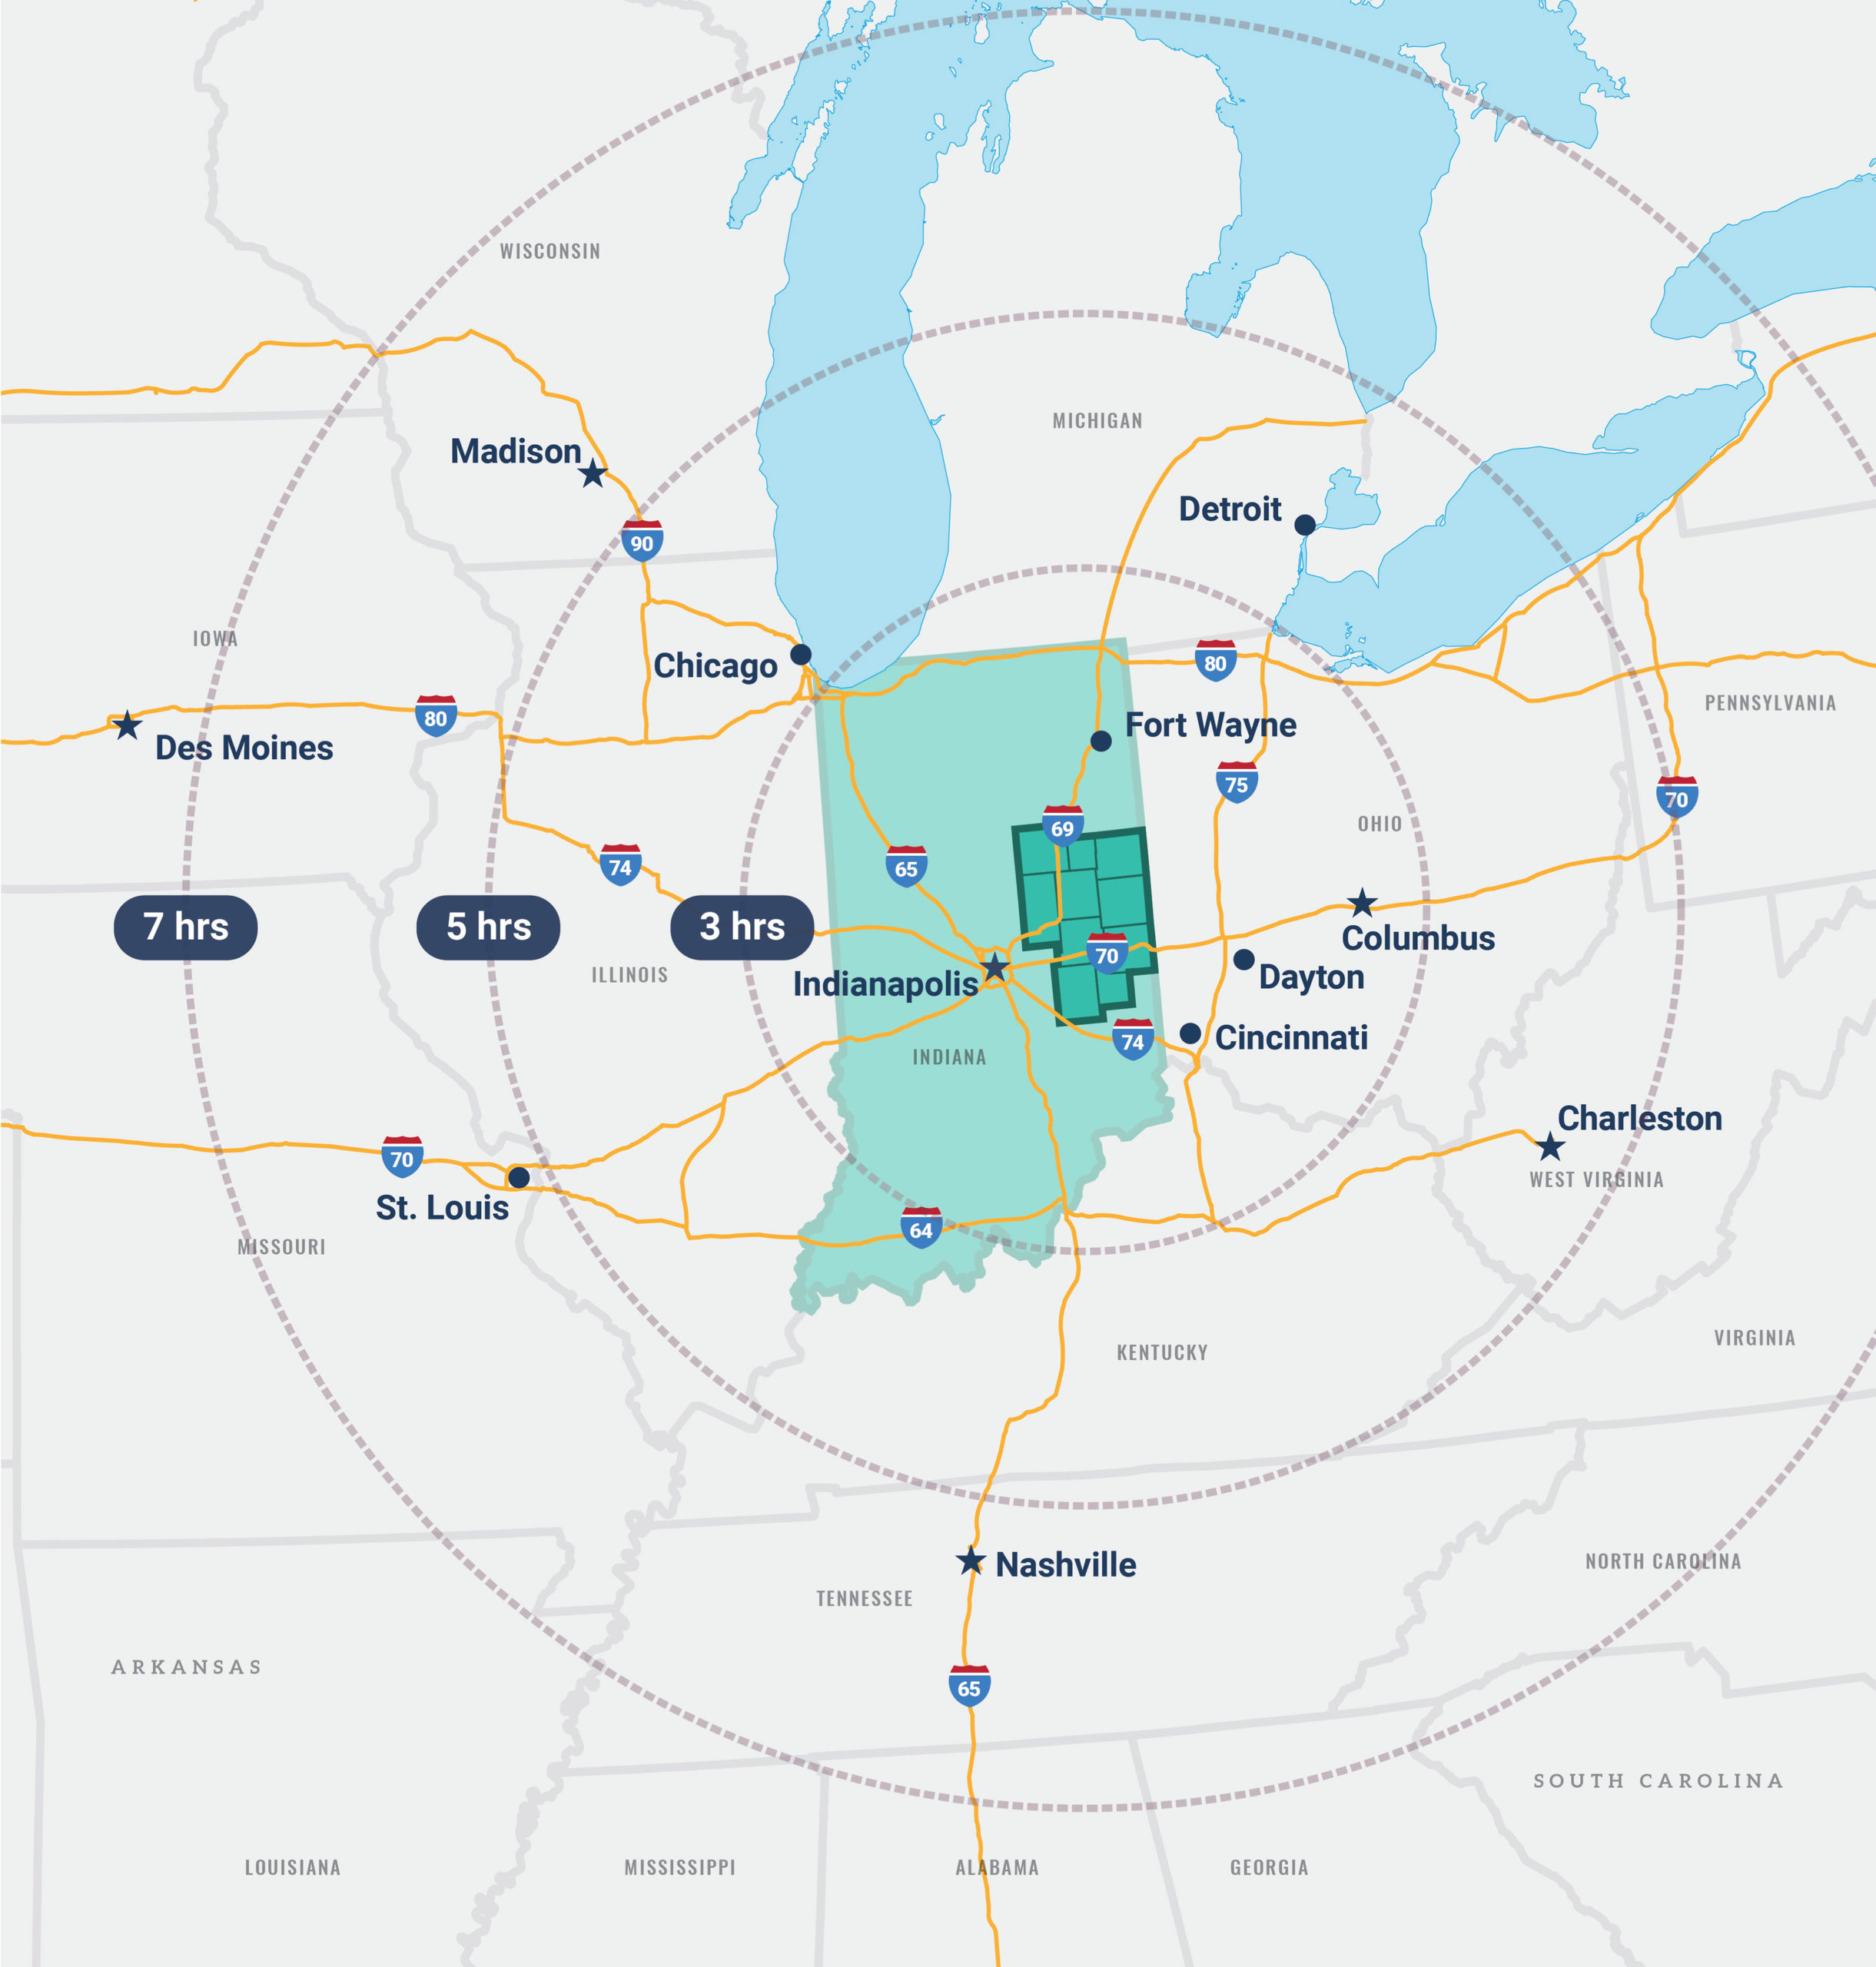 View of map showing drive times to major cities and states outside of East Central Indiana